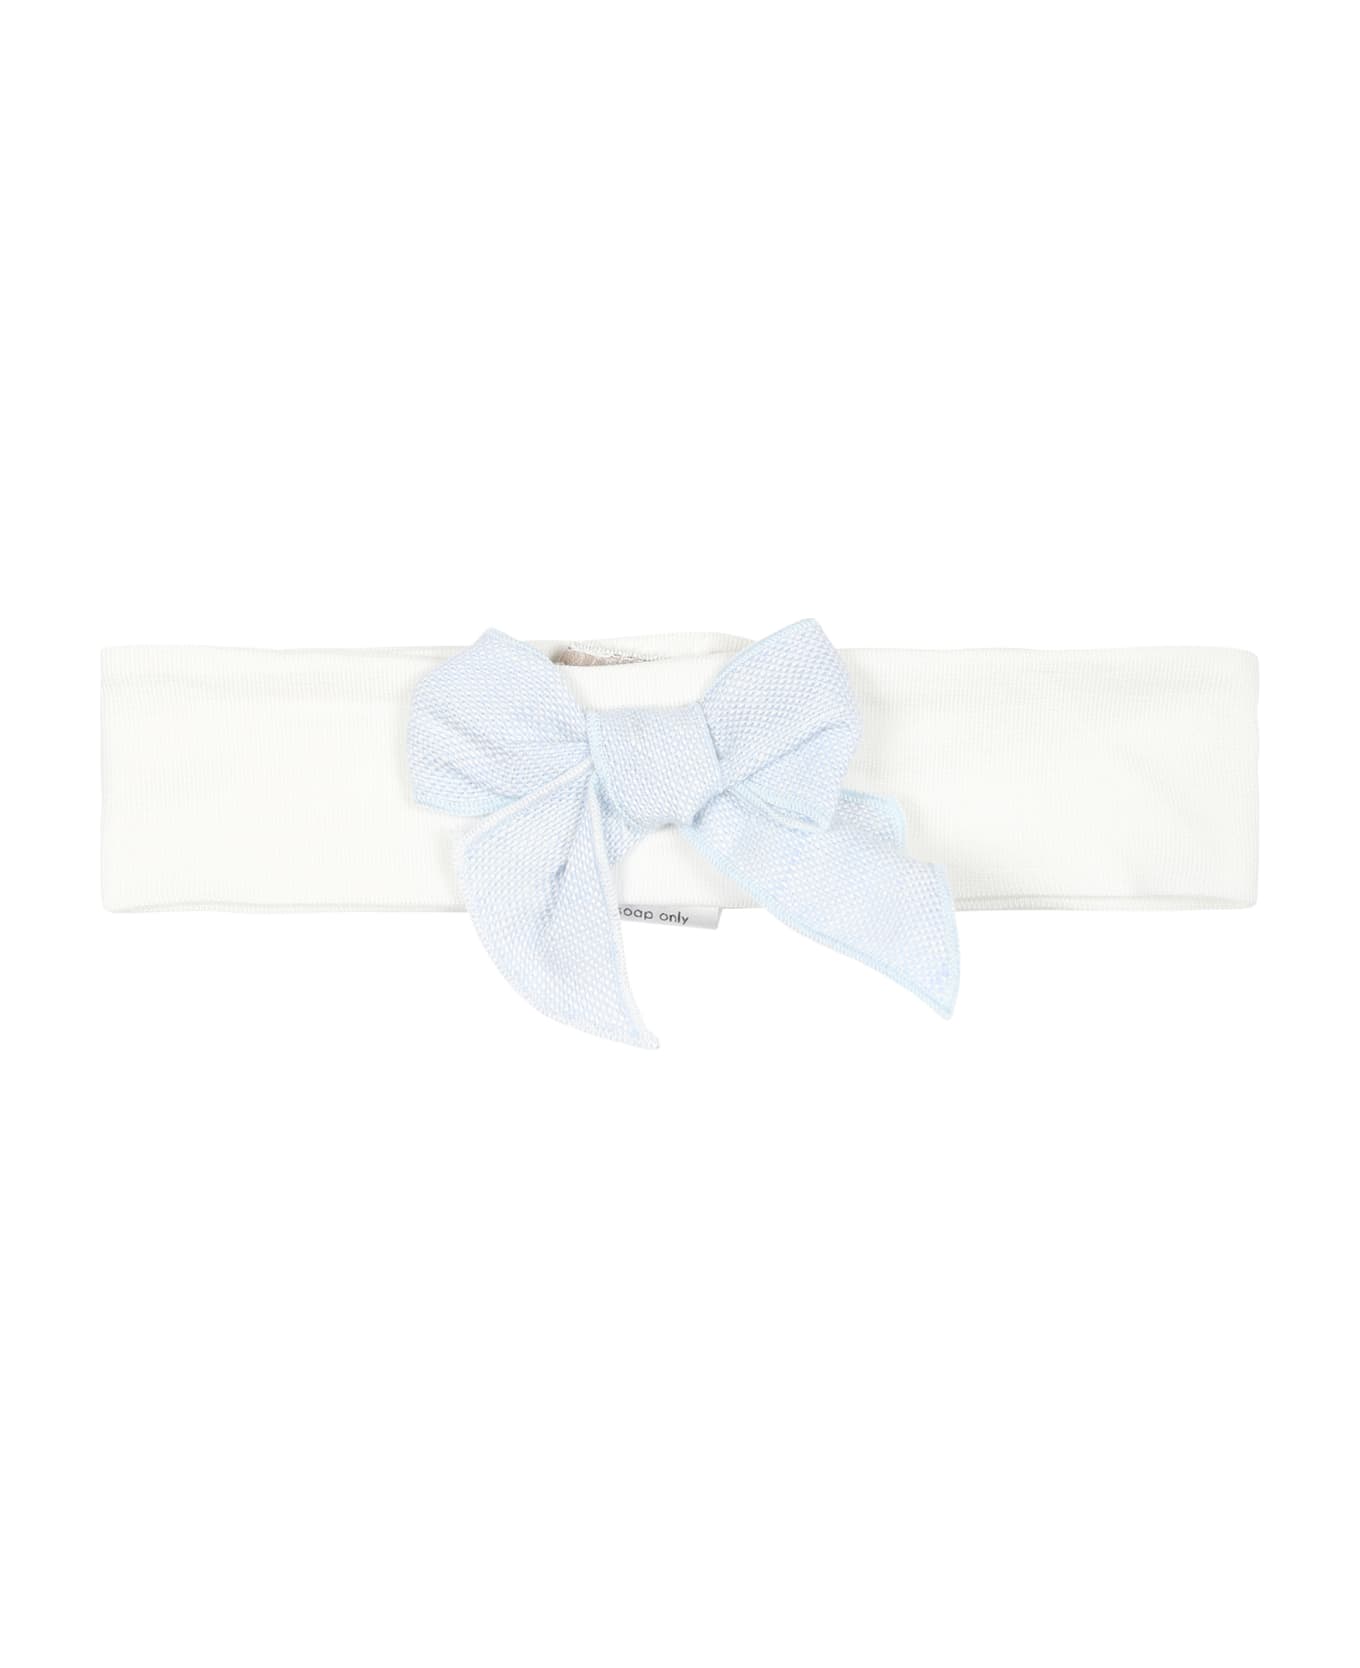 La stupenderia White Hair Band For Baby Girl With Light Blue Bow - White アクセサリー＆ギフト